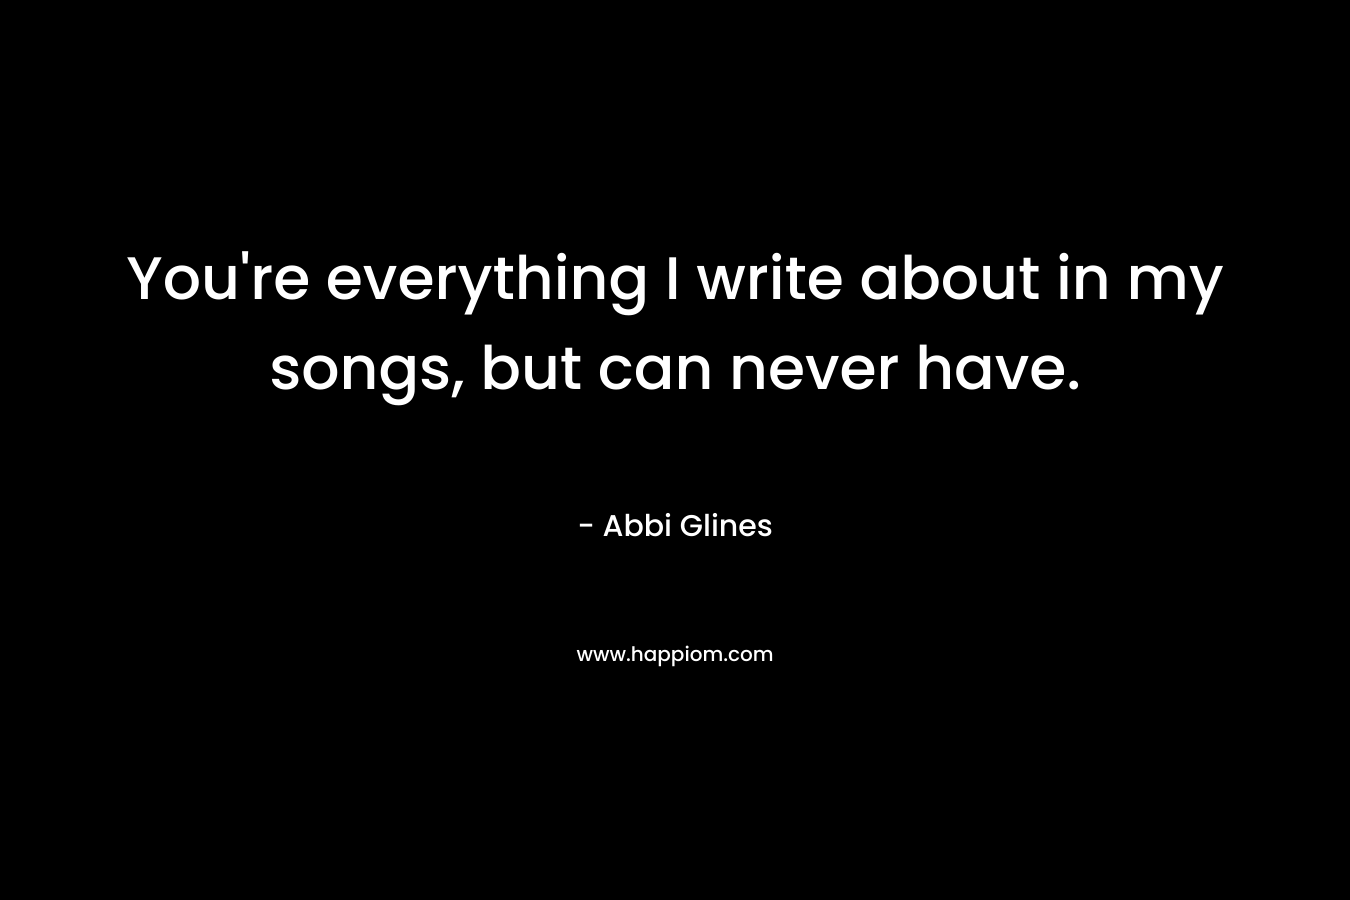 You’re everything I write about in my songs, but can never have. – Abbi Glines